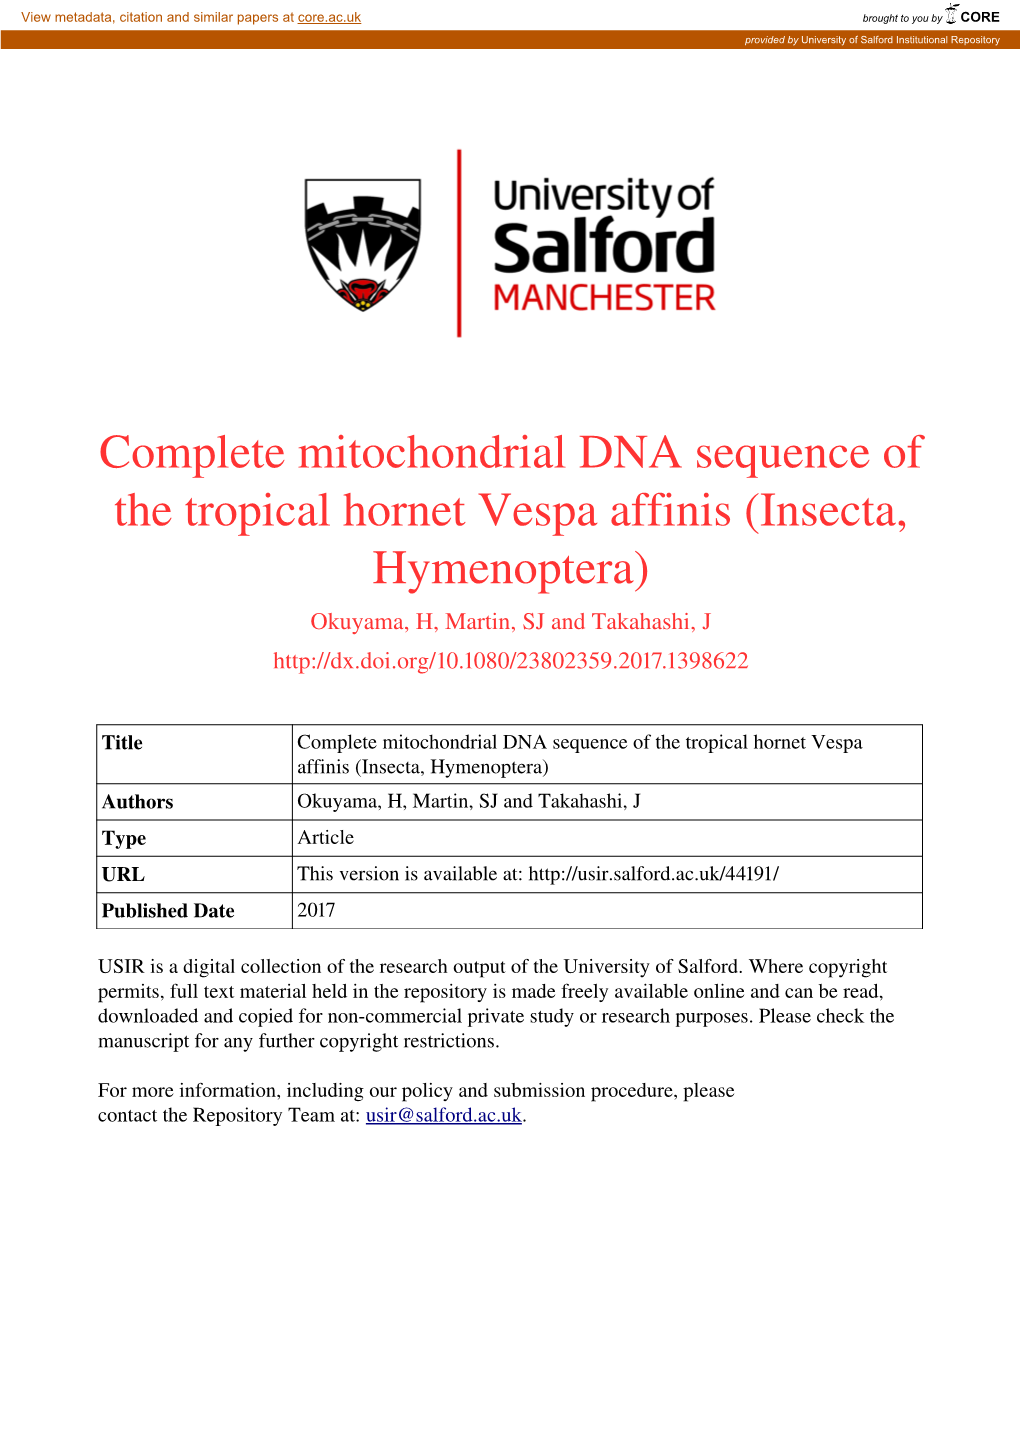 Complete Mitochondrial DNA Sequence of the Tropical Hornet